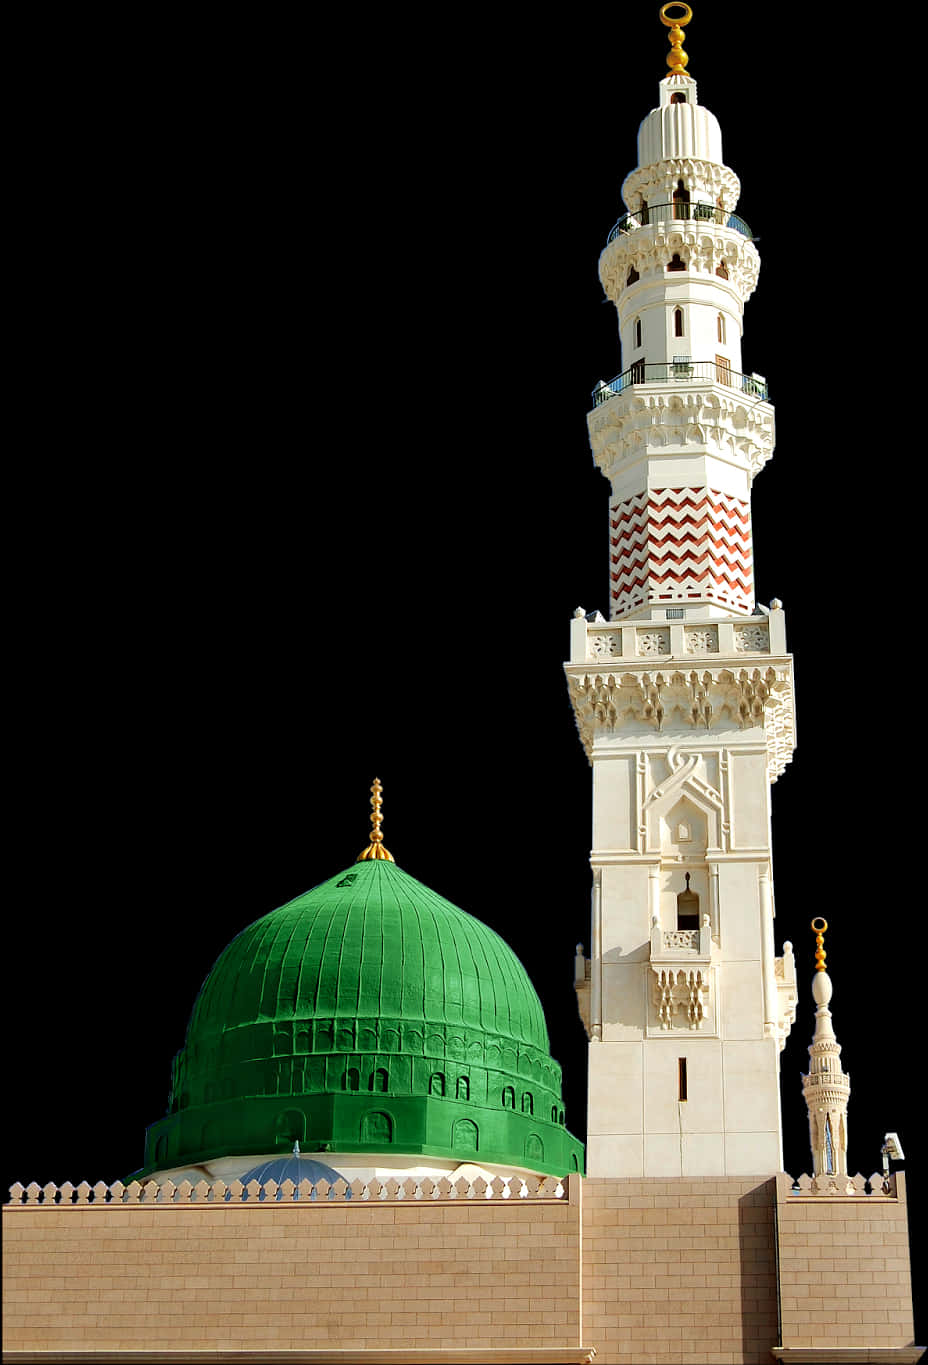 A Green Dome And A White Tower